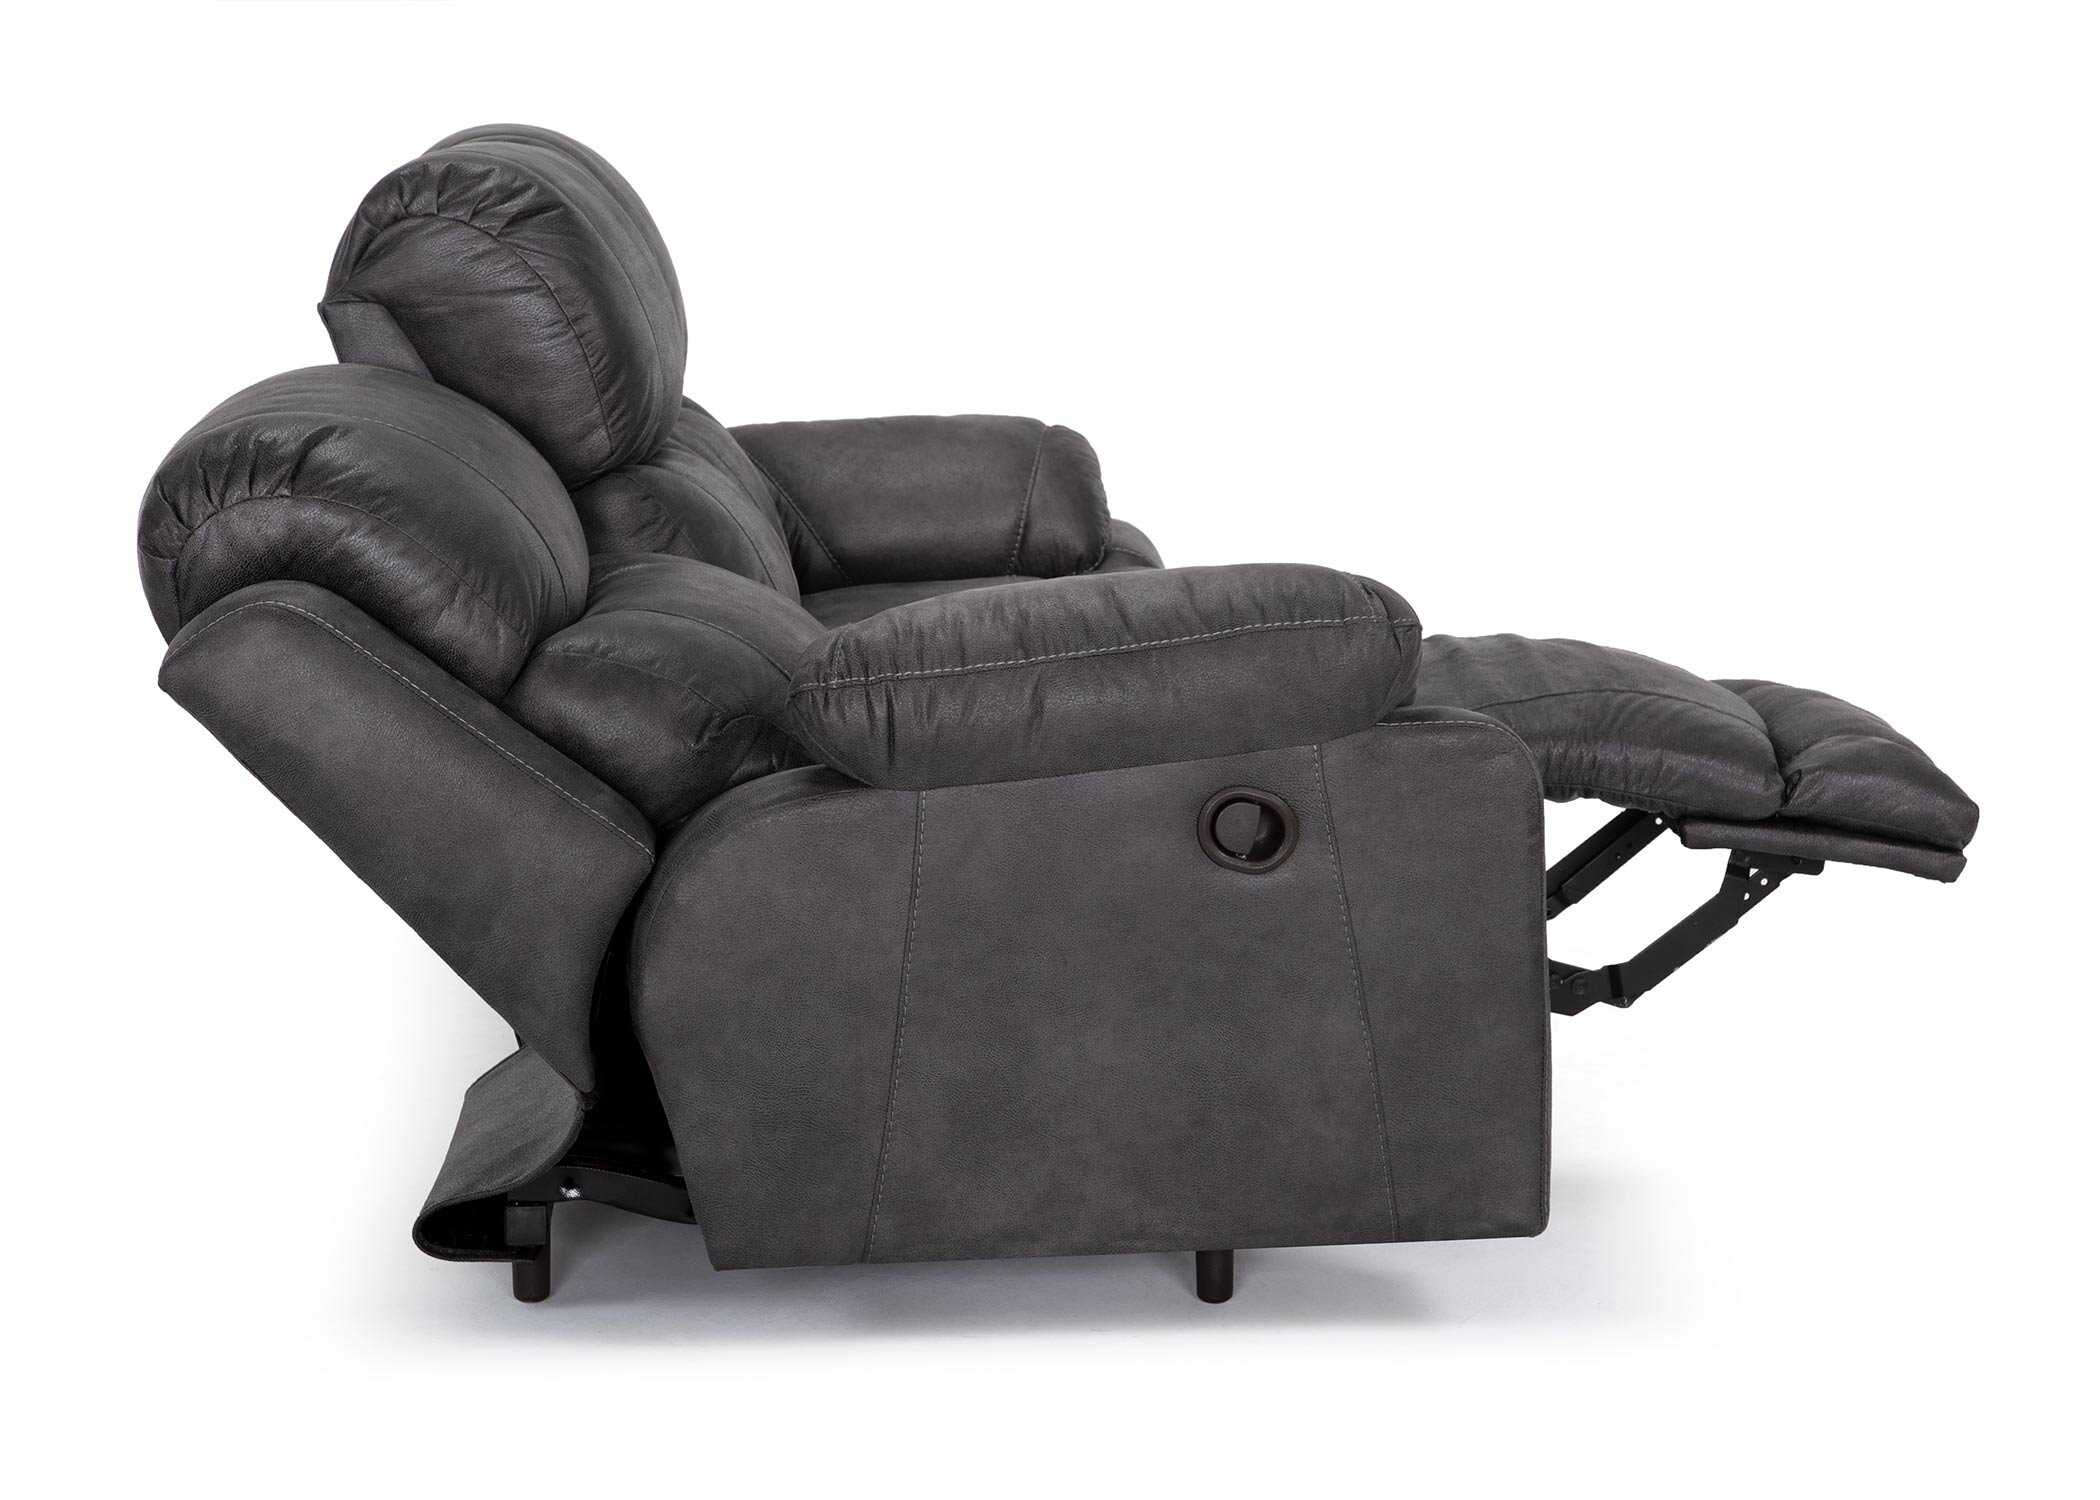  635 Dayton Collection in 3010-02 Westview Slate - Side/Reclined 